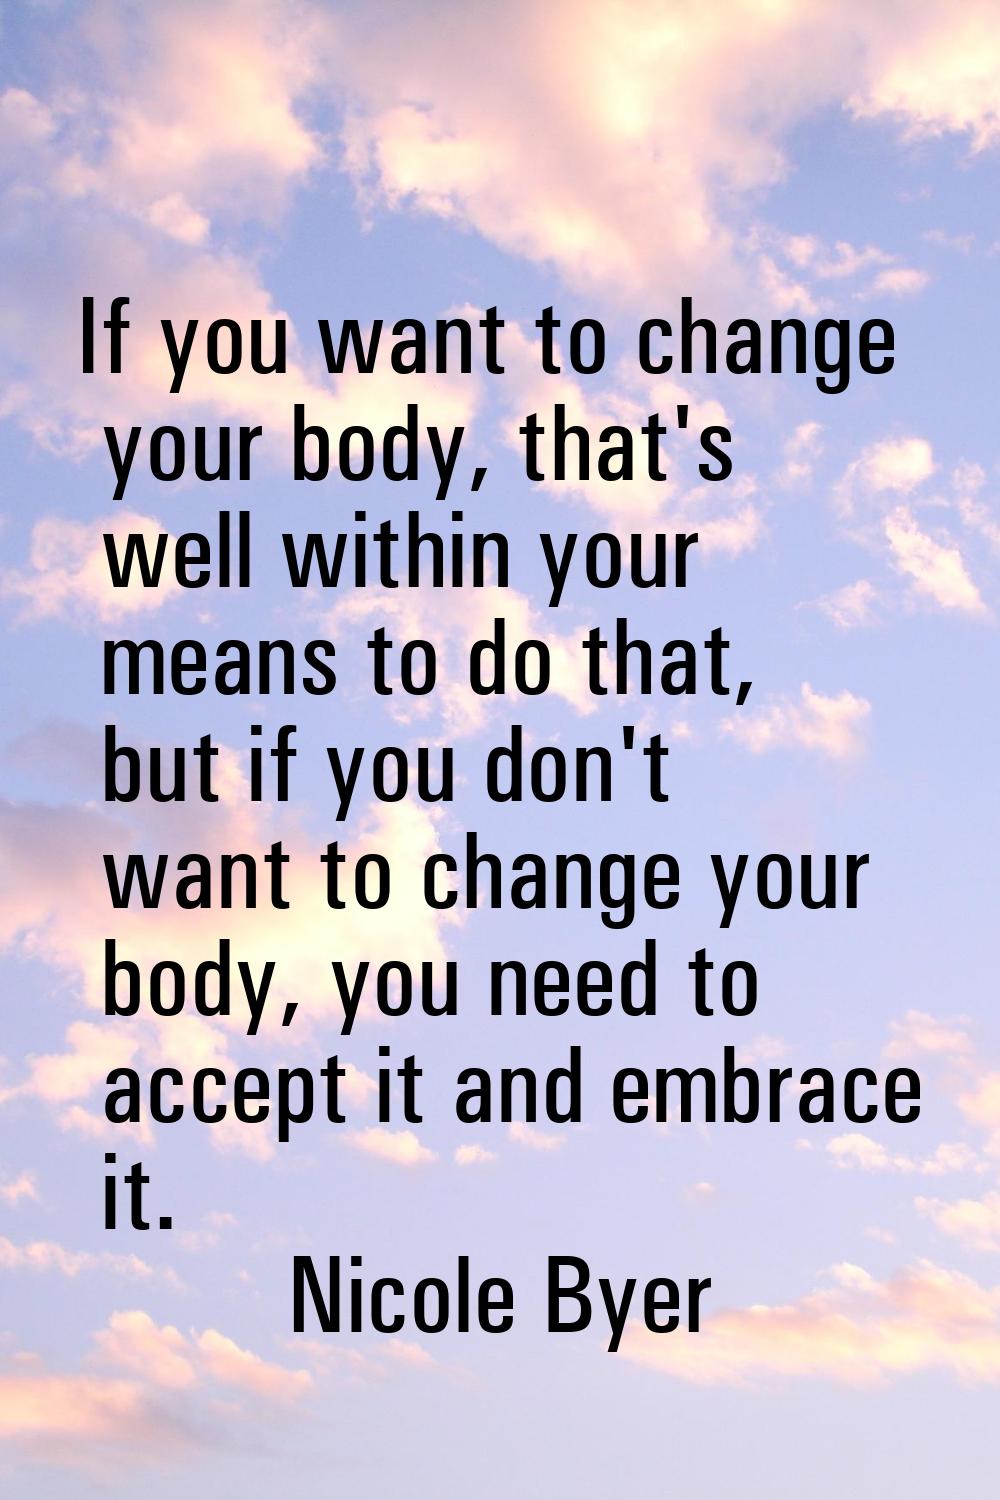 If you want to change your body, that's well within your means to do that, but if you don't want to